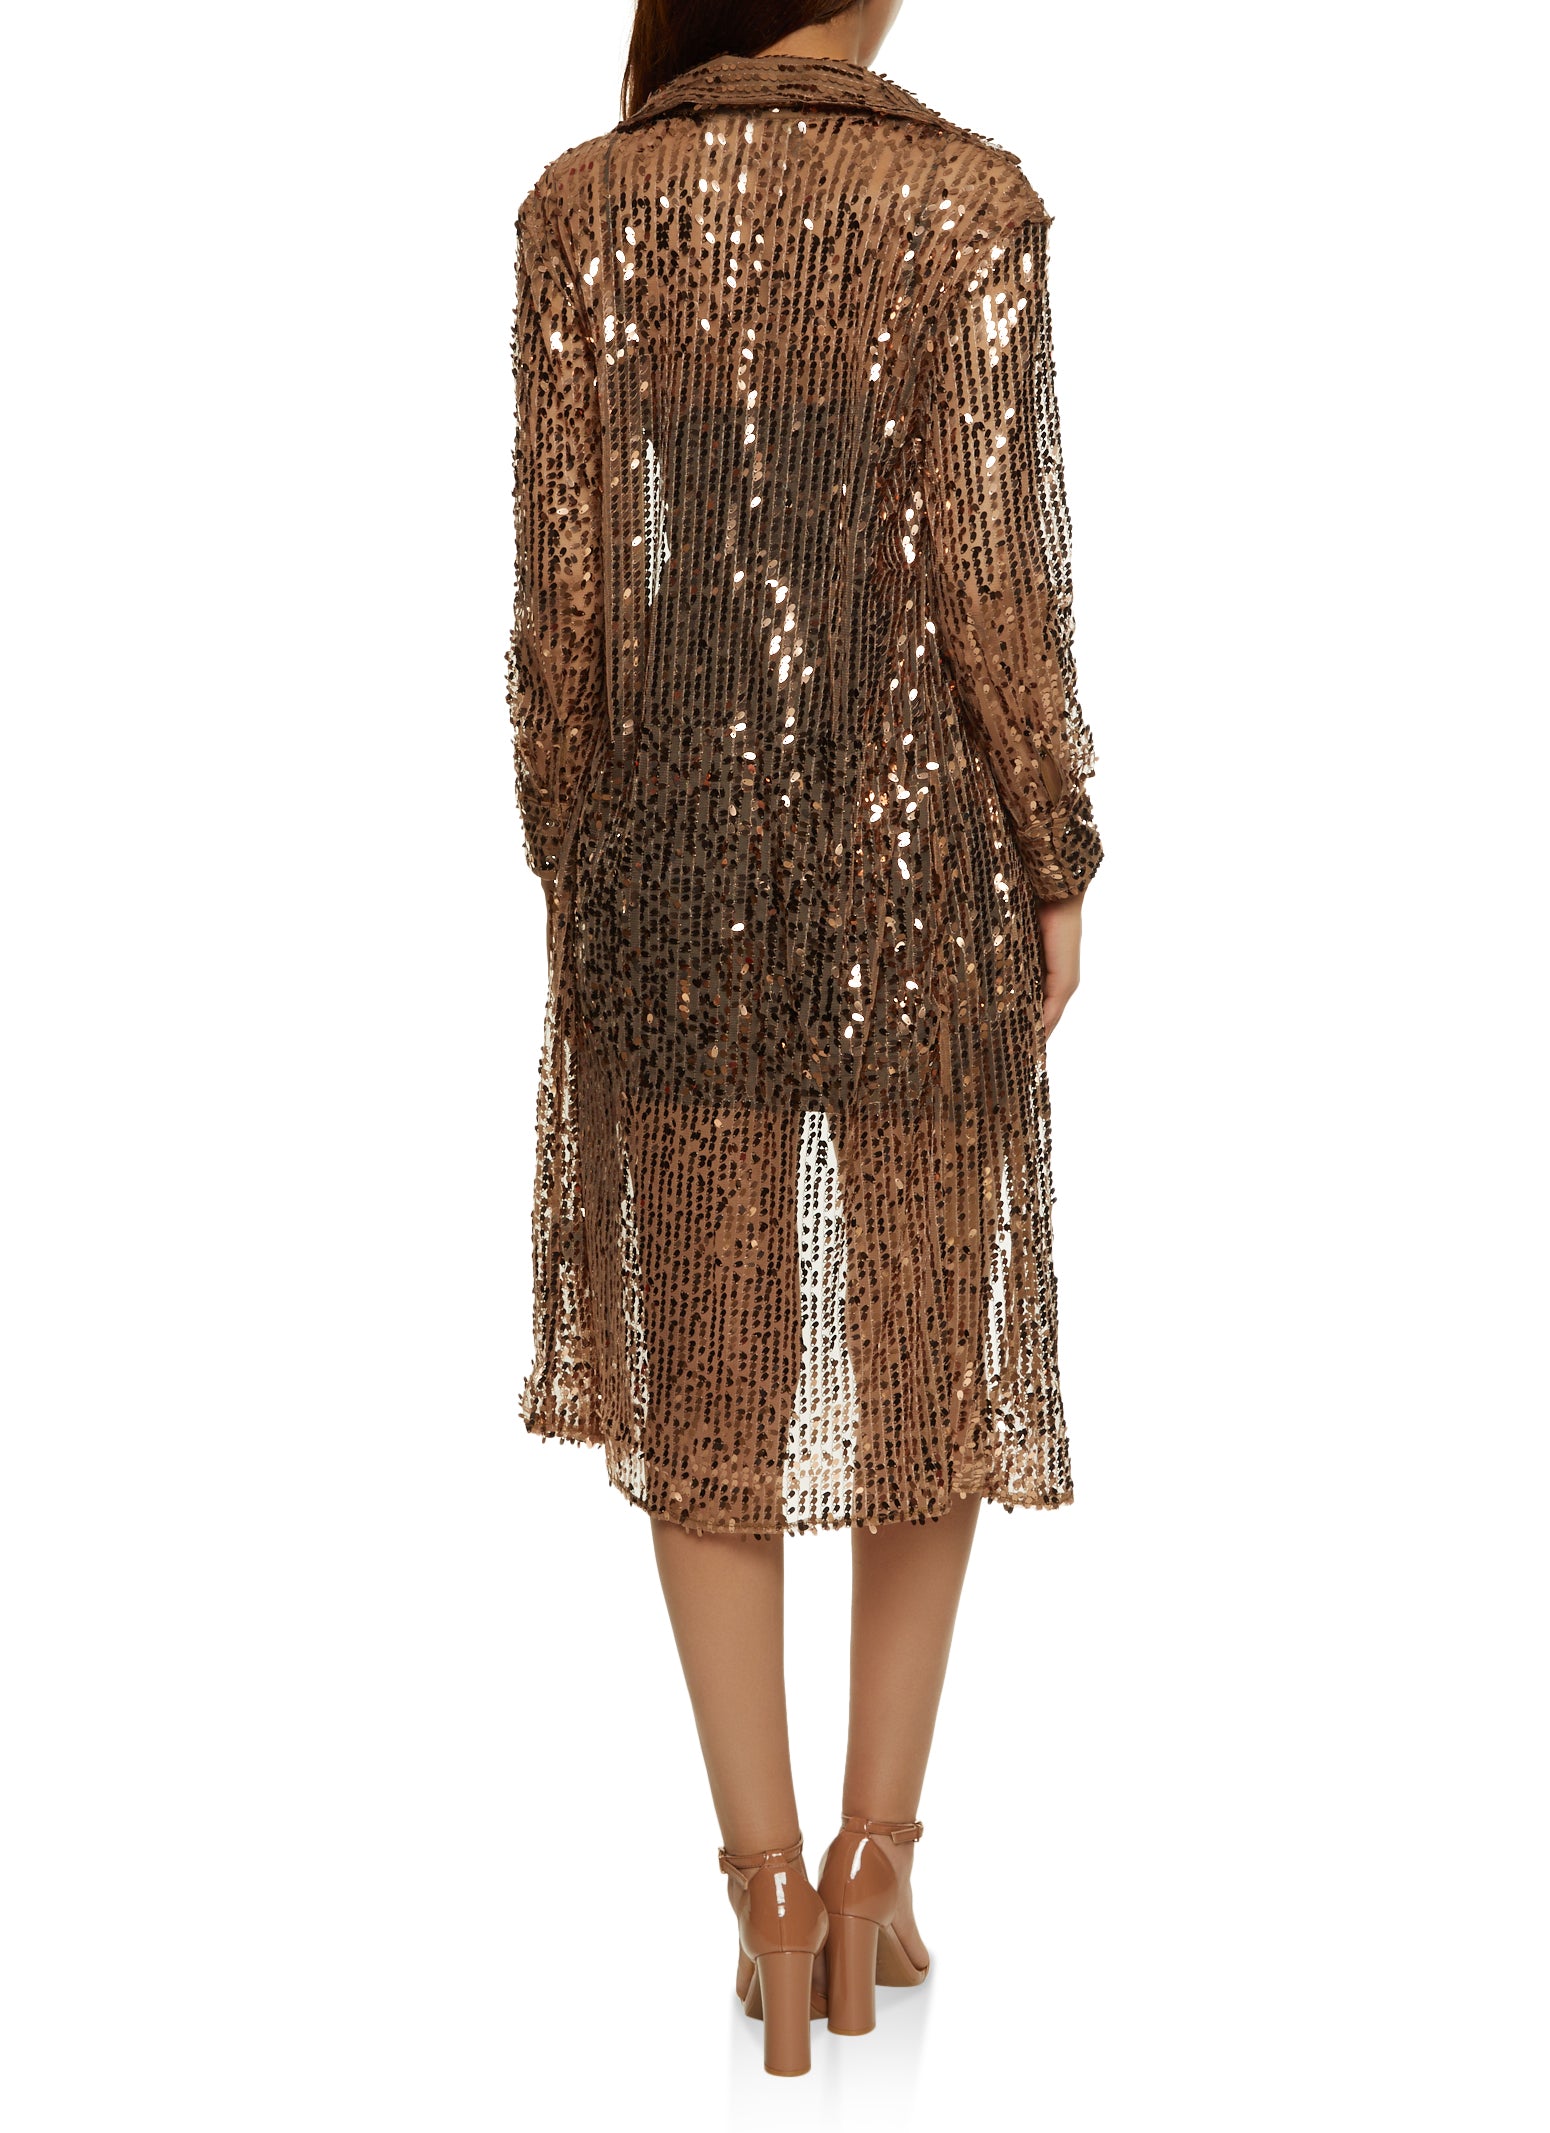 WAY194162 Sequin Duster, Solid Color - Rose Gold/Taupe/Black